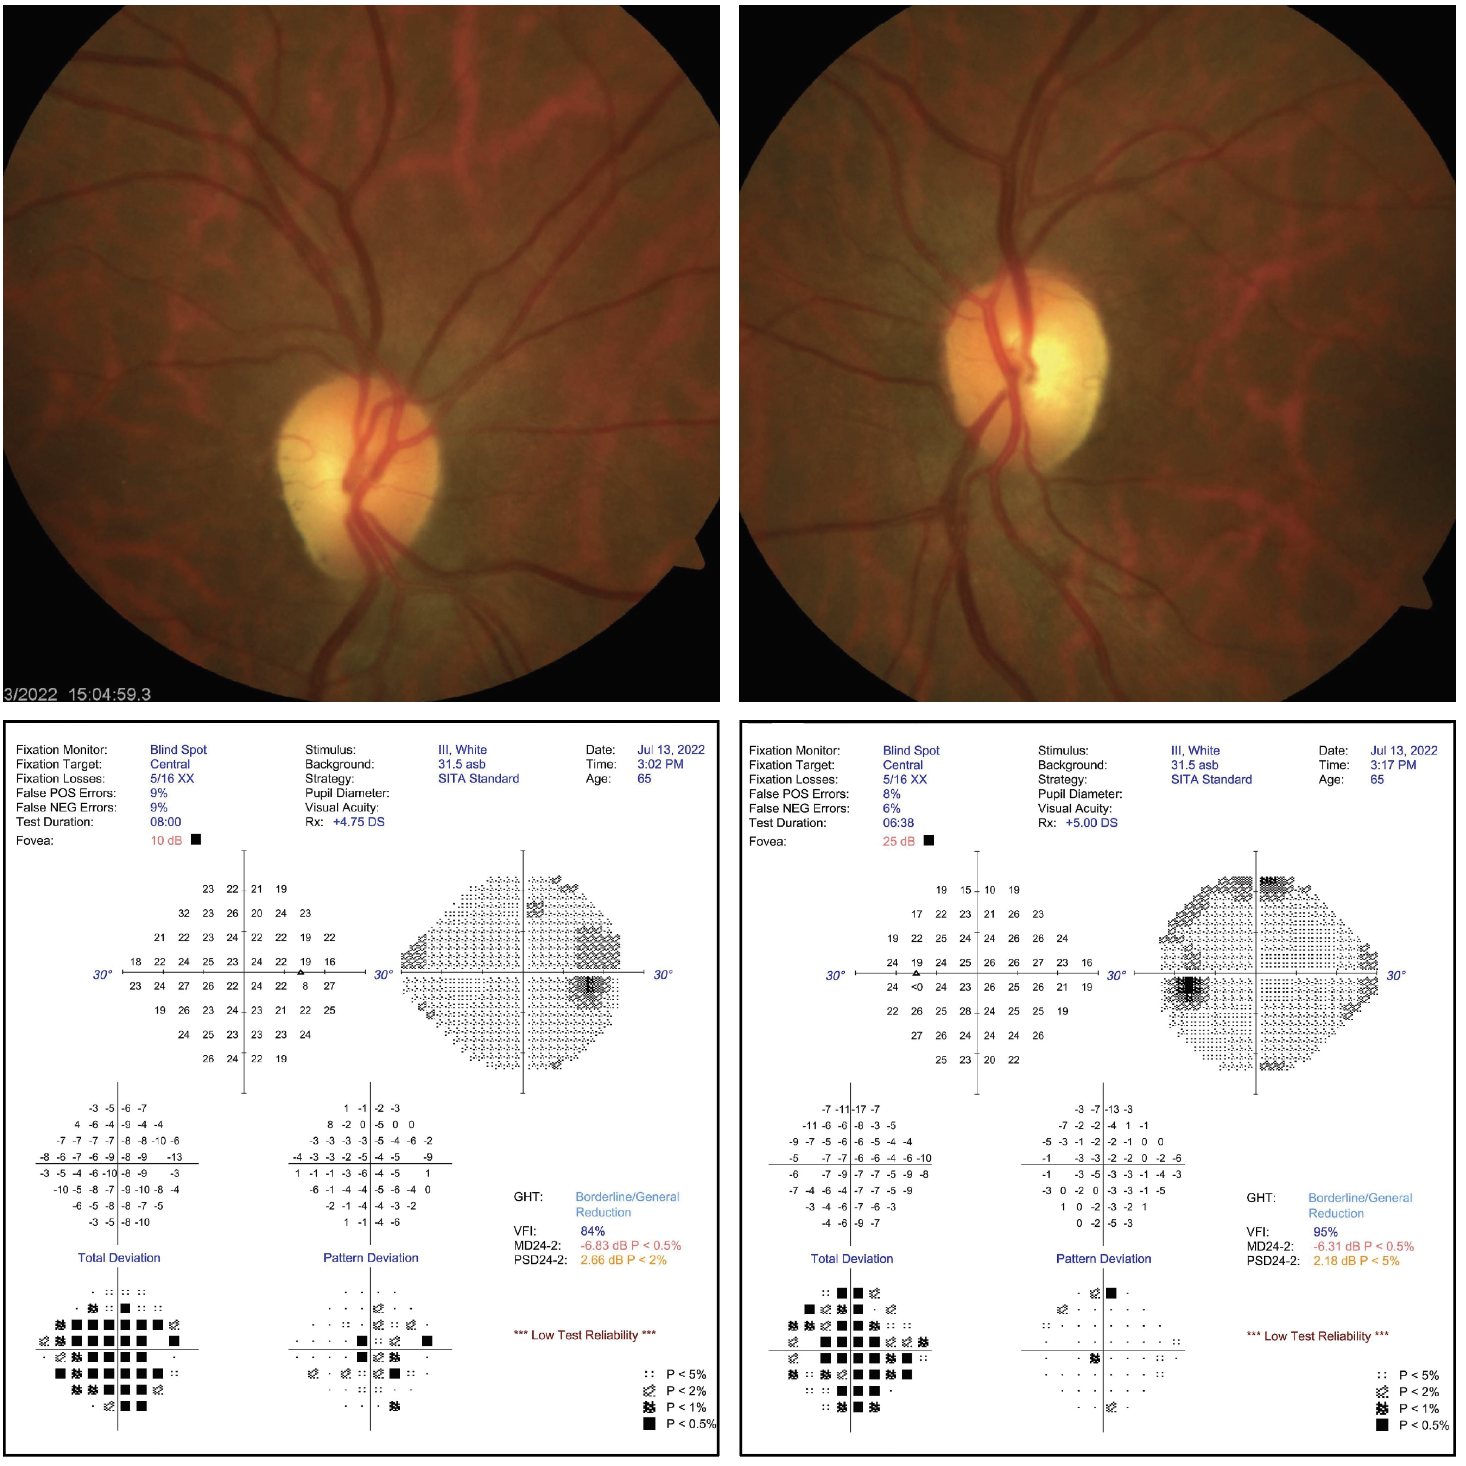 Do you notice any correspondence between the fundus photos and the visual field results? If so, what does it signify?